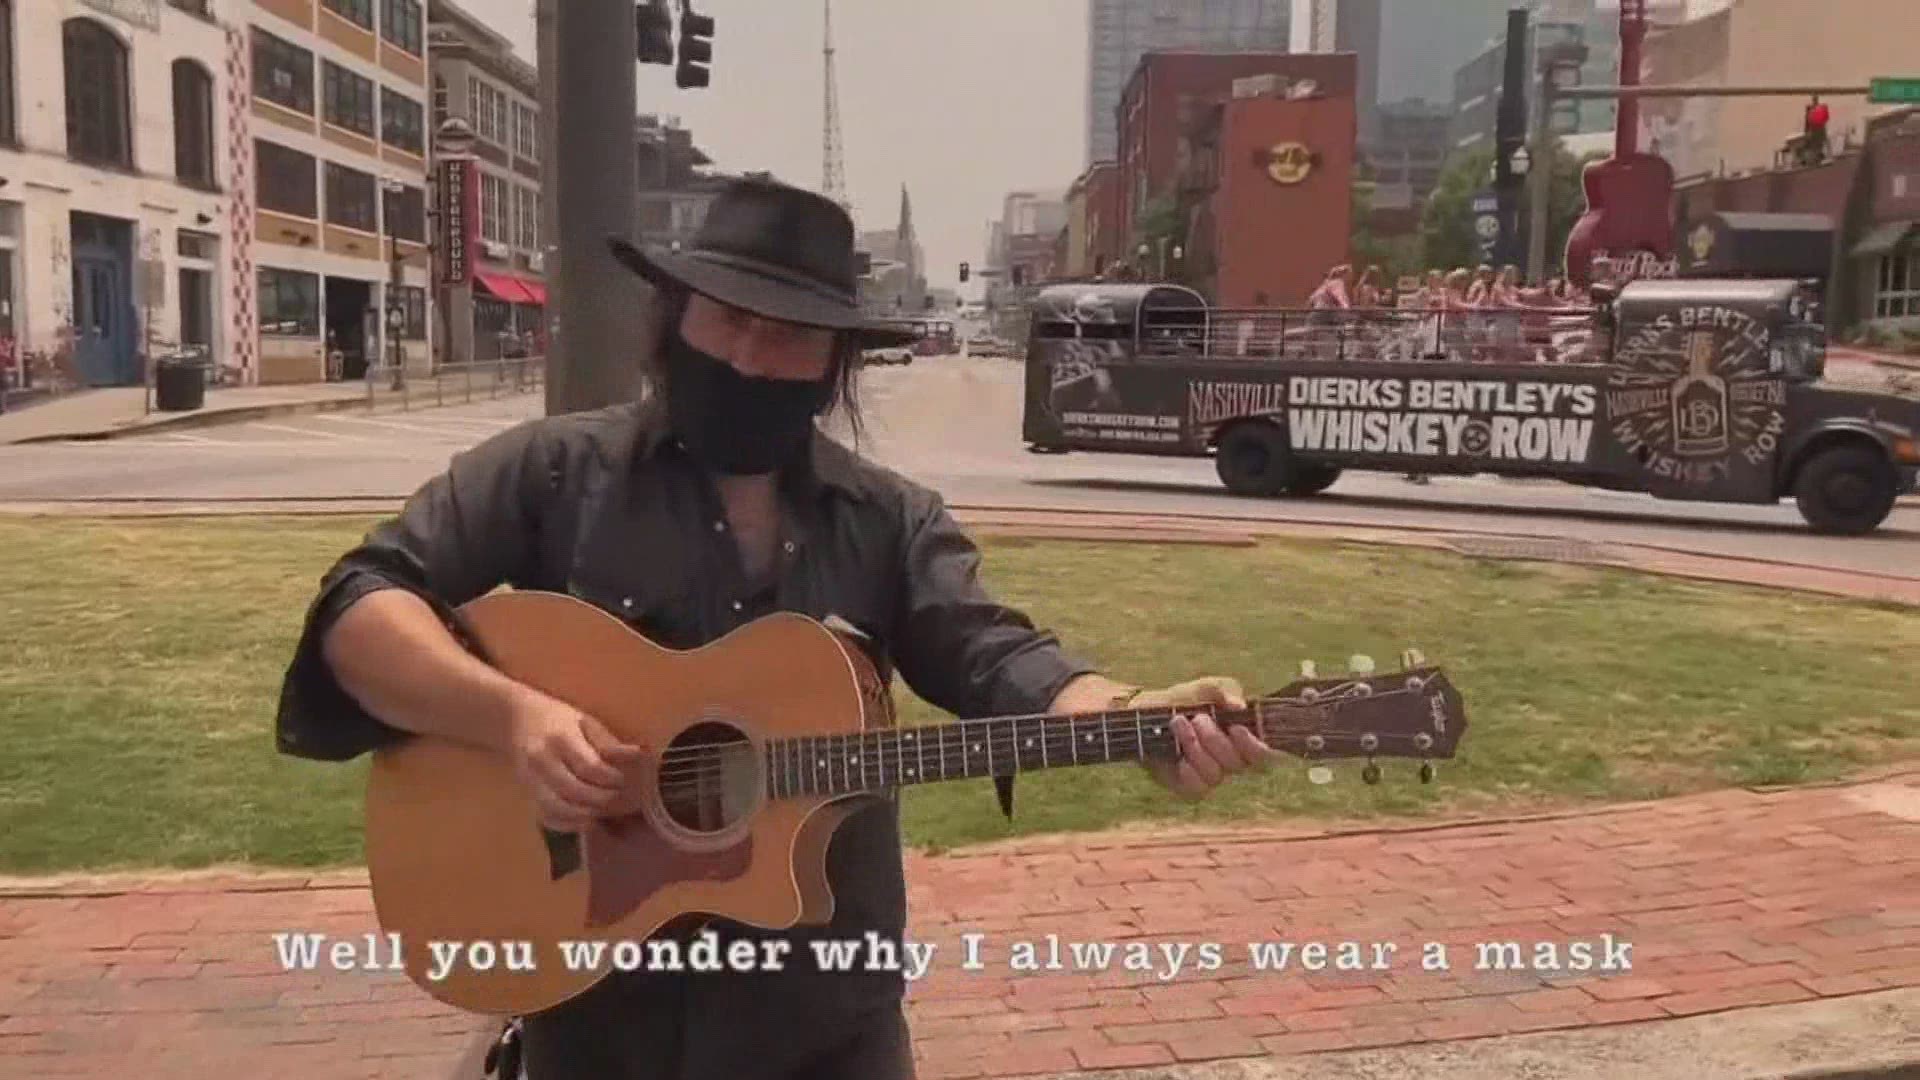 Country musician Adam Kurtz was tired of people in Nashville not wearing masks so he made a parody song about it.